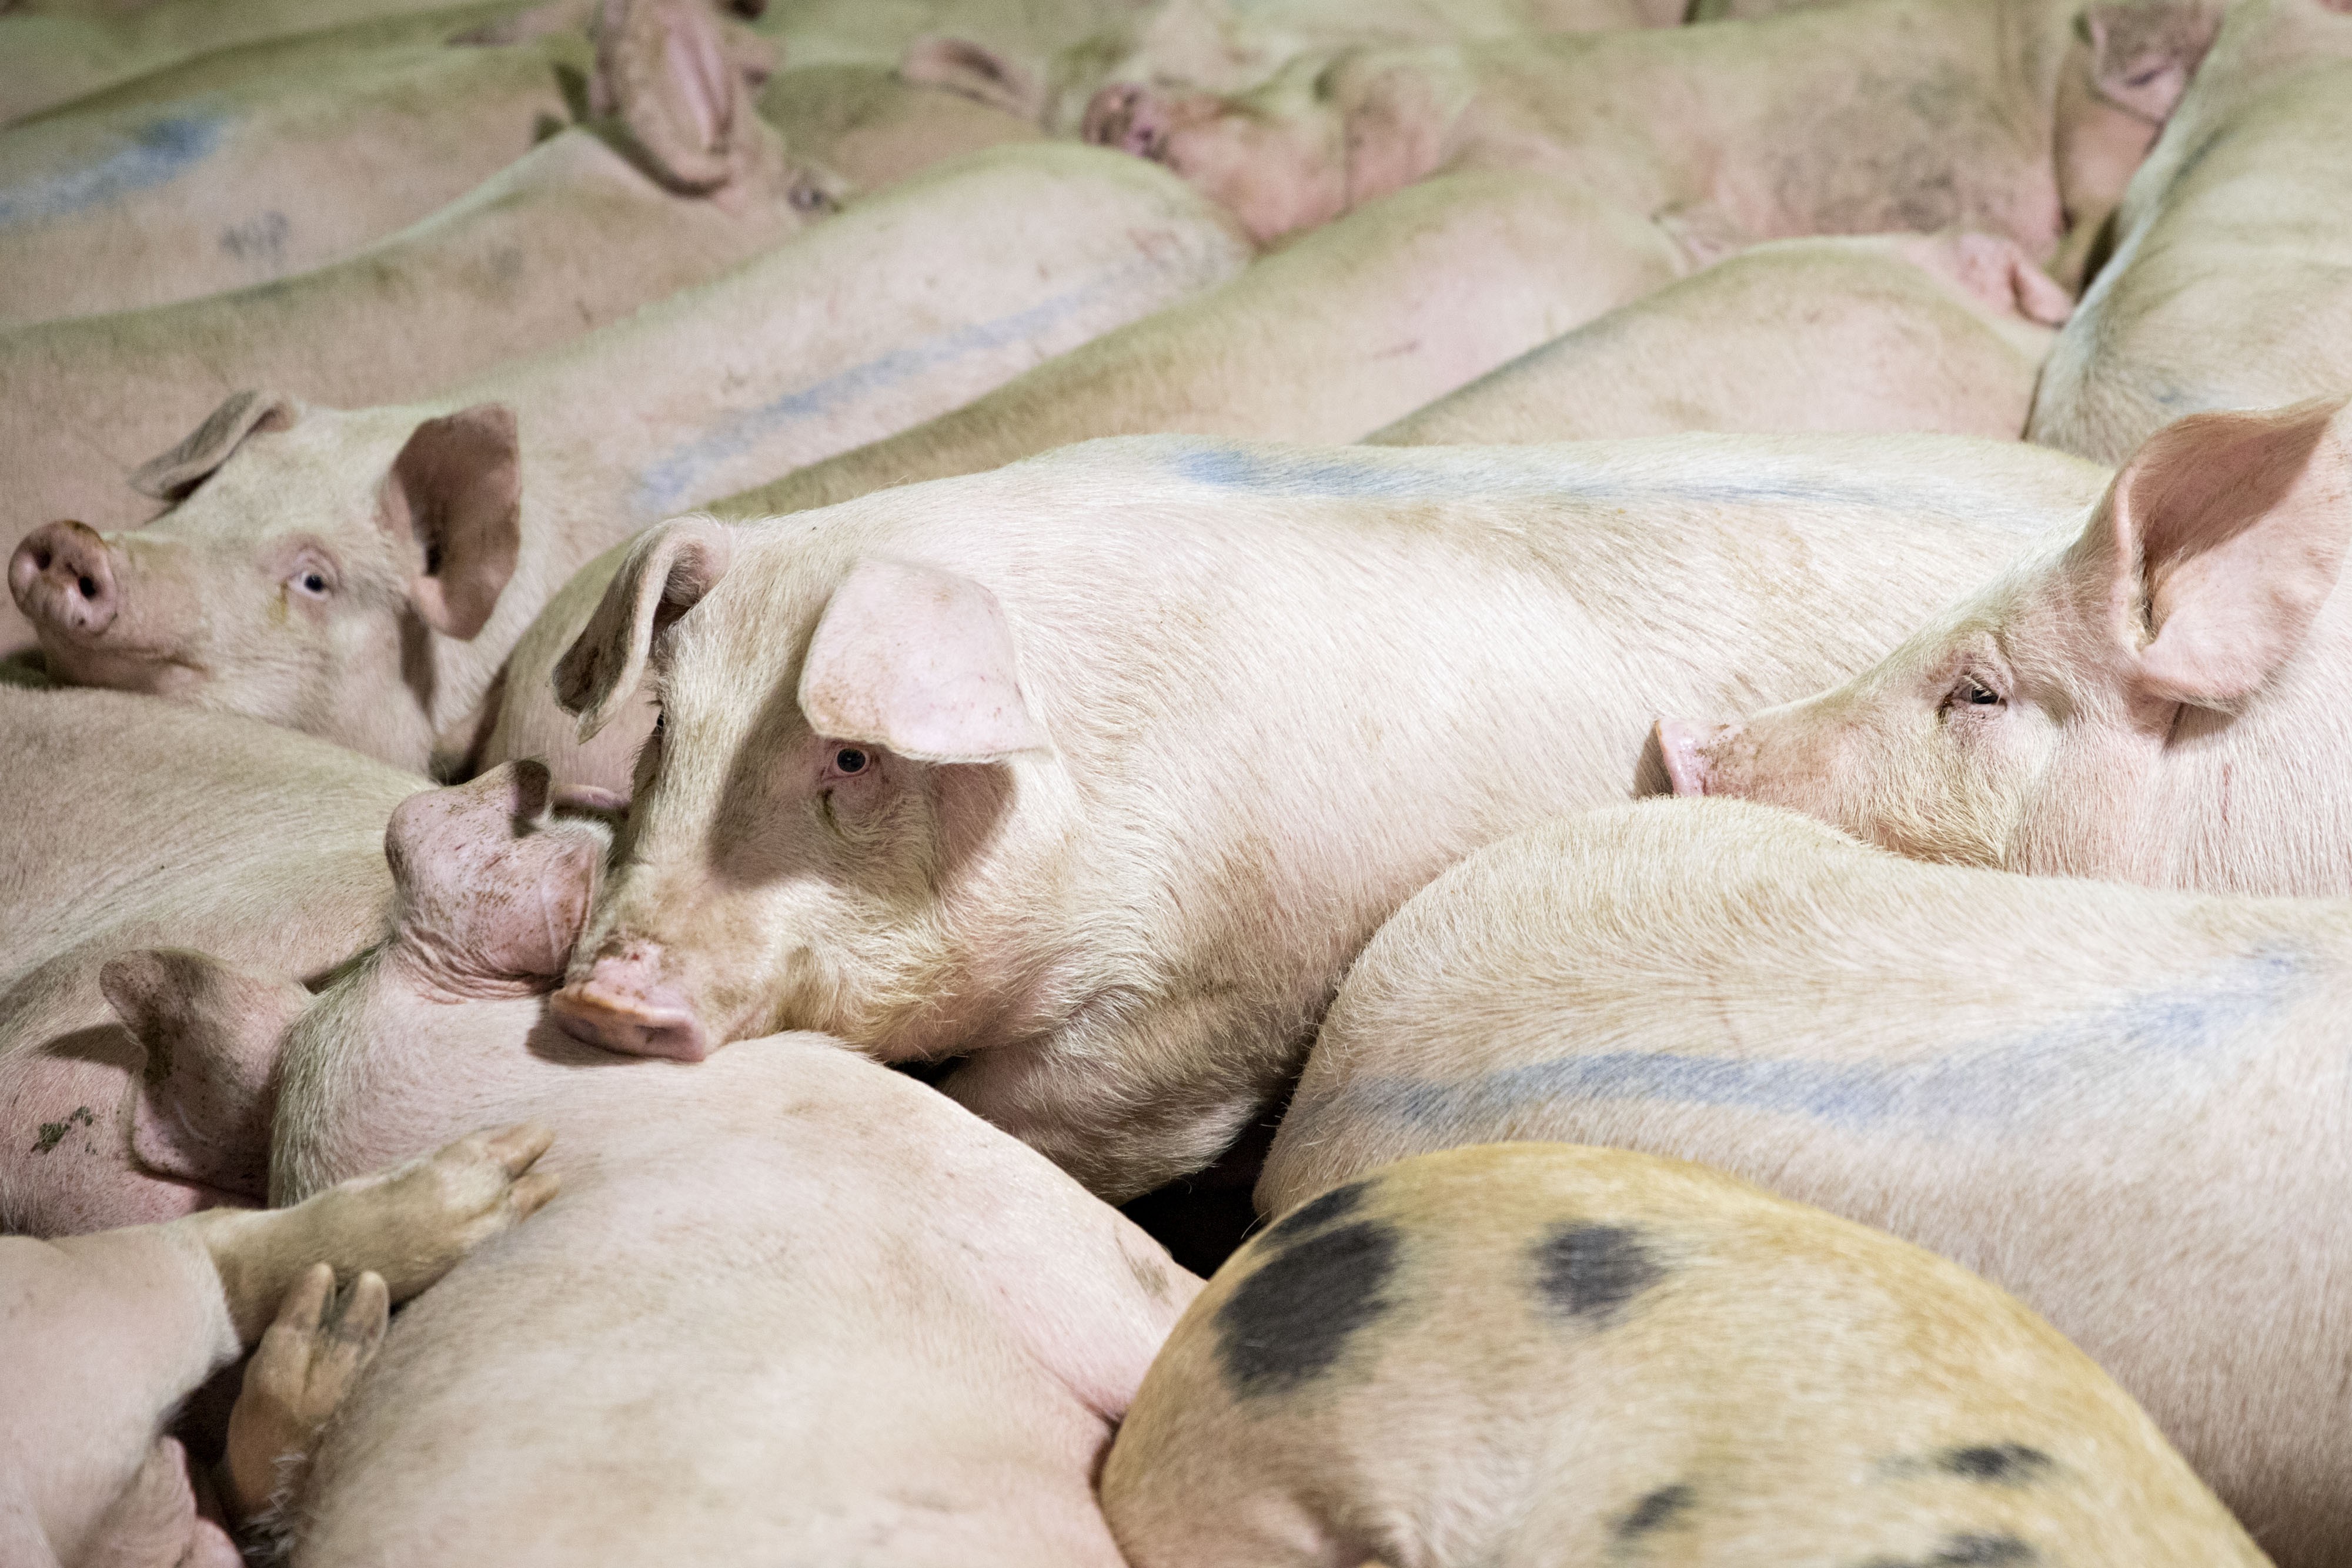 Pigs lie in a pen before being butchered at Smithfield Foods’ pork processing facility in Milan, Missouri on Wednesday, April 12, 2017. WH Group of Hunan acquired Virginia-based Smithfield, the world's largest pork producer, in 2013 for US$6.95 billion. Photo: Bloomberg